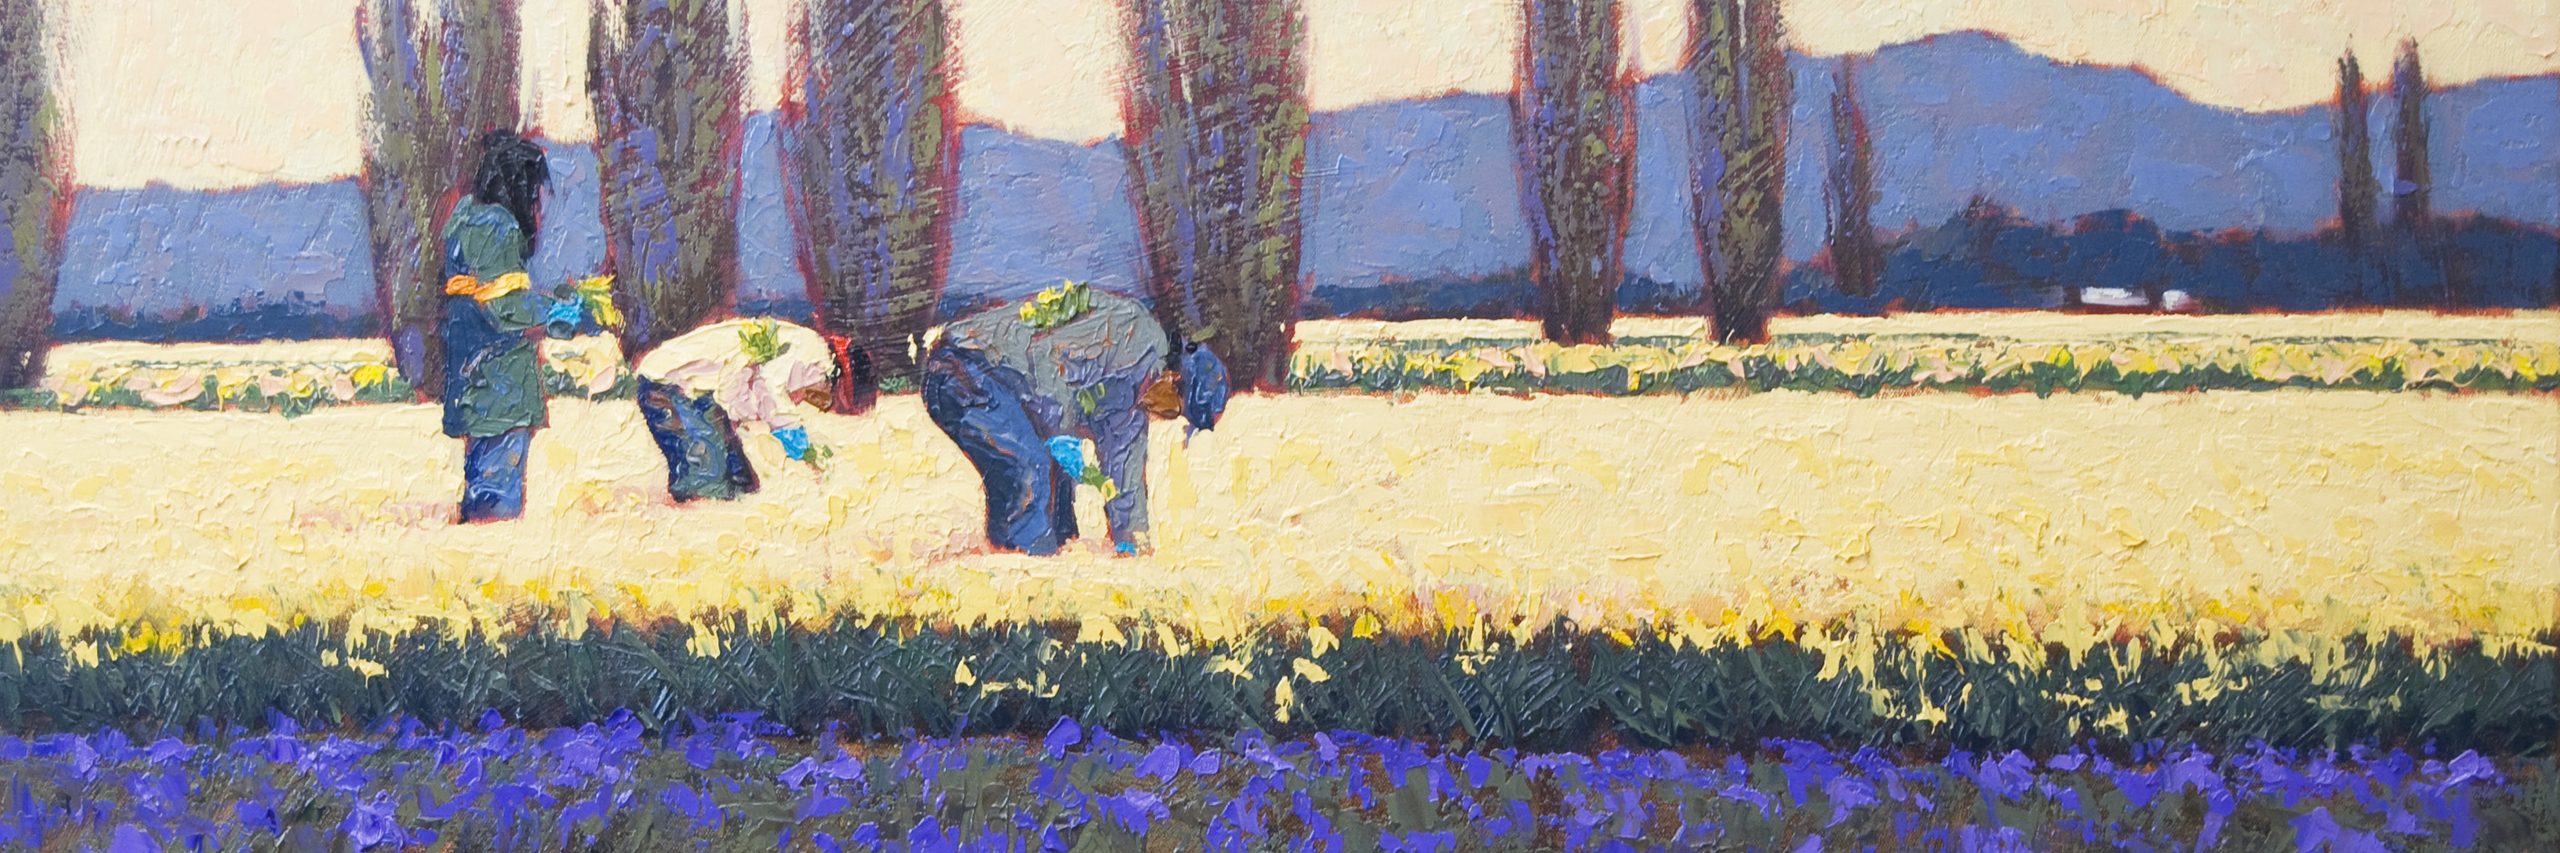 Alfred Currier, Bed of Iris, 2018, oil on canvas, 30”h x 40”w, Collection of Cynthia Sears, Promised Gift to BIMA